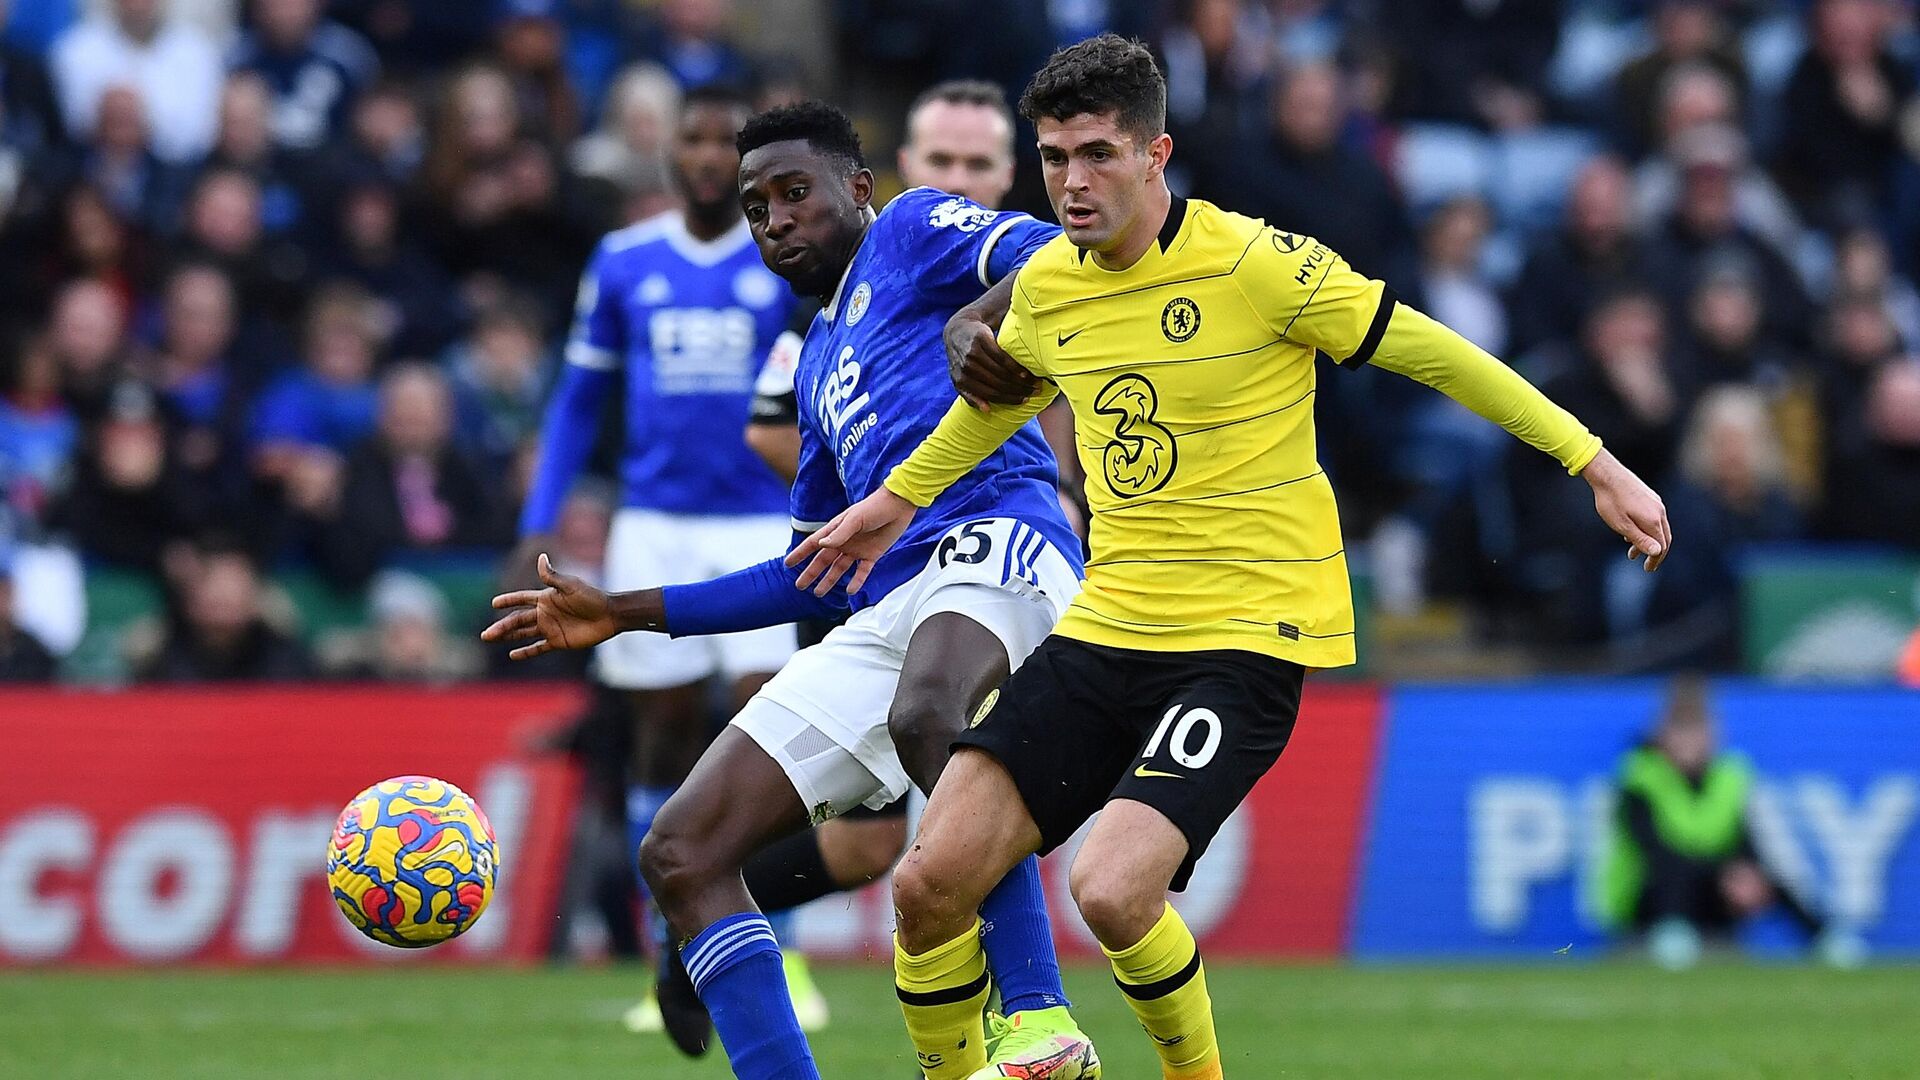 Leicester City's Nigerian midfielder Wilfred Ndidi (L) vies with Chelsea's US midfielder Christian Pulisic during the English Premier League football match between Leicester City and Chelsea at the King Power Stadium in Leicester, central England on November 20, 2021. (Photo by Ben STANSALL / AFP) / RESTRICTED TO EDITORIAL USE. No use with unauthorized audio, video, data, fixture lists, club/league logos or 'live' services. Online in-match use limited to 120 images. An additional 40 images may be used in extra time. No video emulation. Social media in-match use limited to 120 images. An additional 40 images may be used in extra time. No use in betting publications, games or single club/league/player publications. /  - РИА Новости, 1920, 20.11.2021